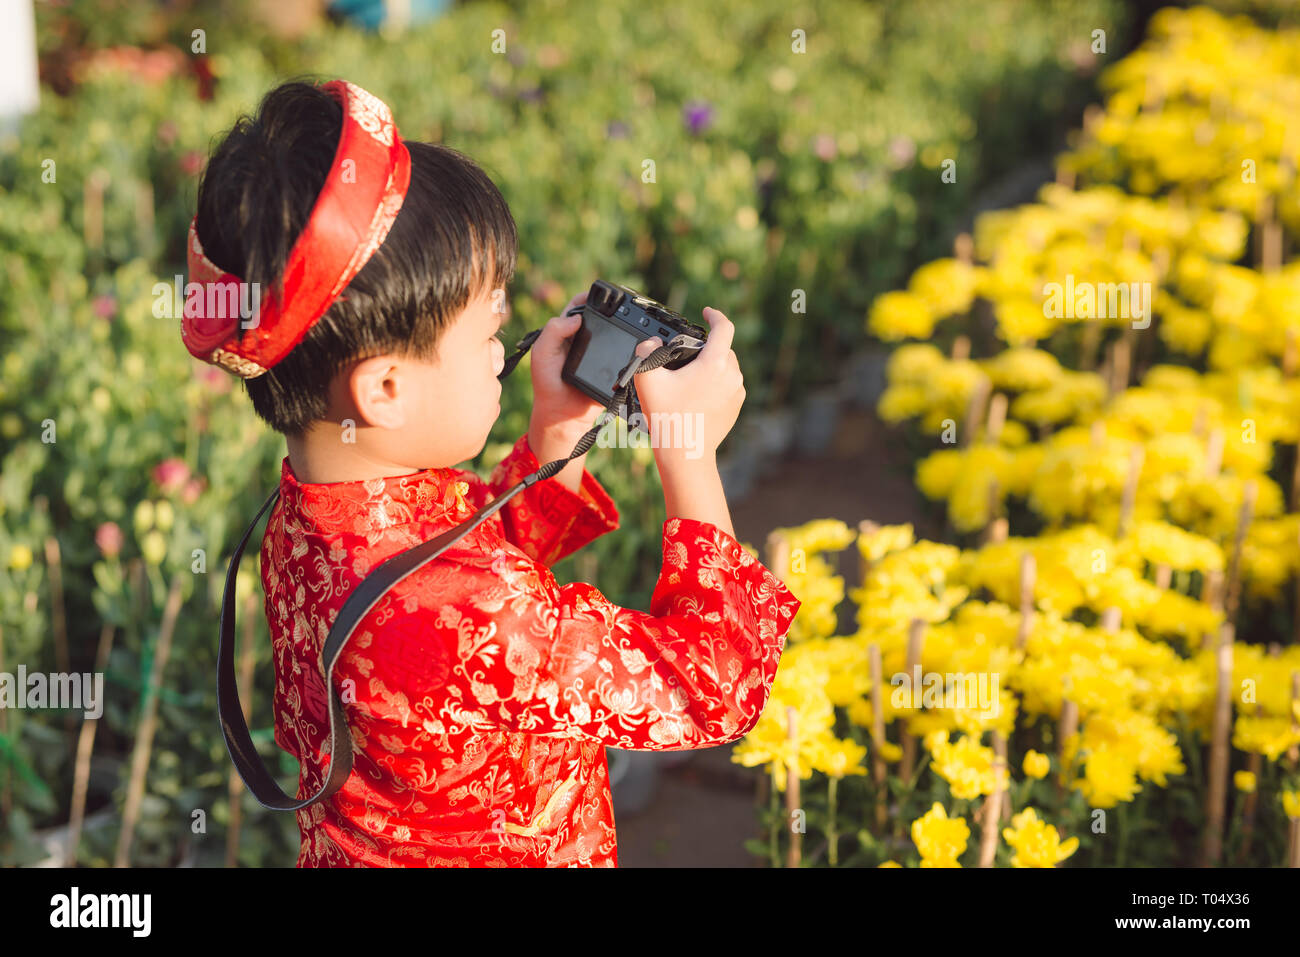 Child with digital compact camera outdoors. Cute little Vietnamese boy in ao dai dress. Tet holiday Stock Photo